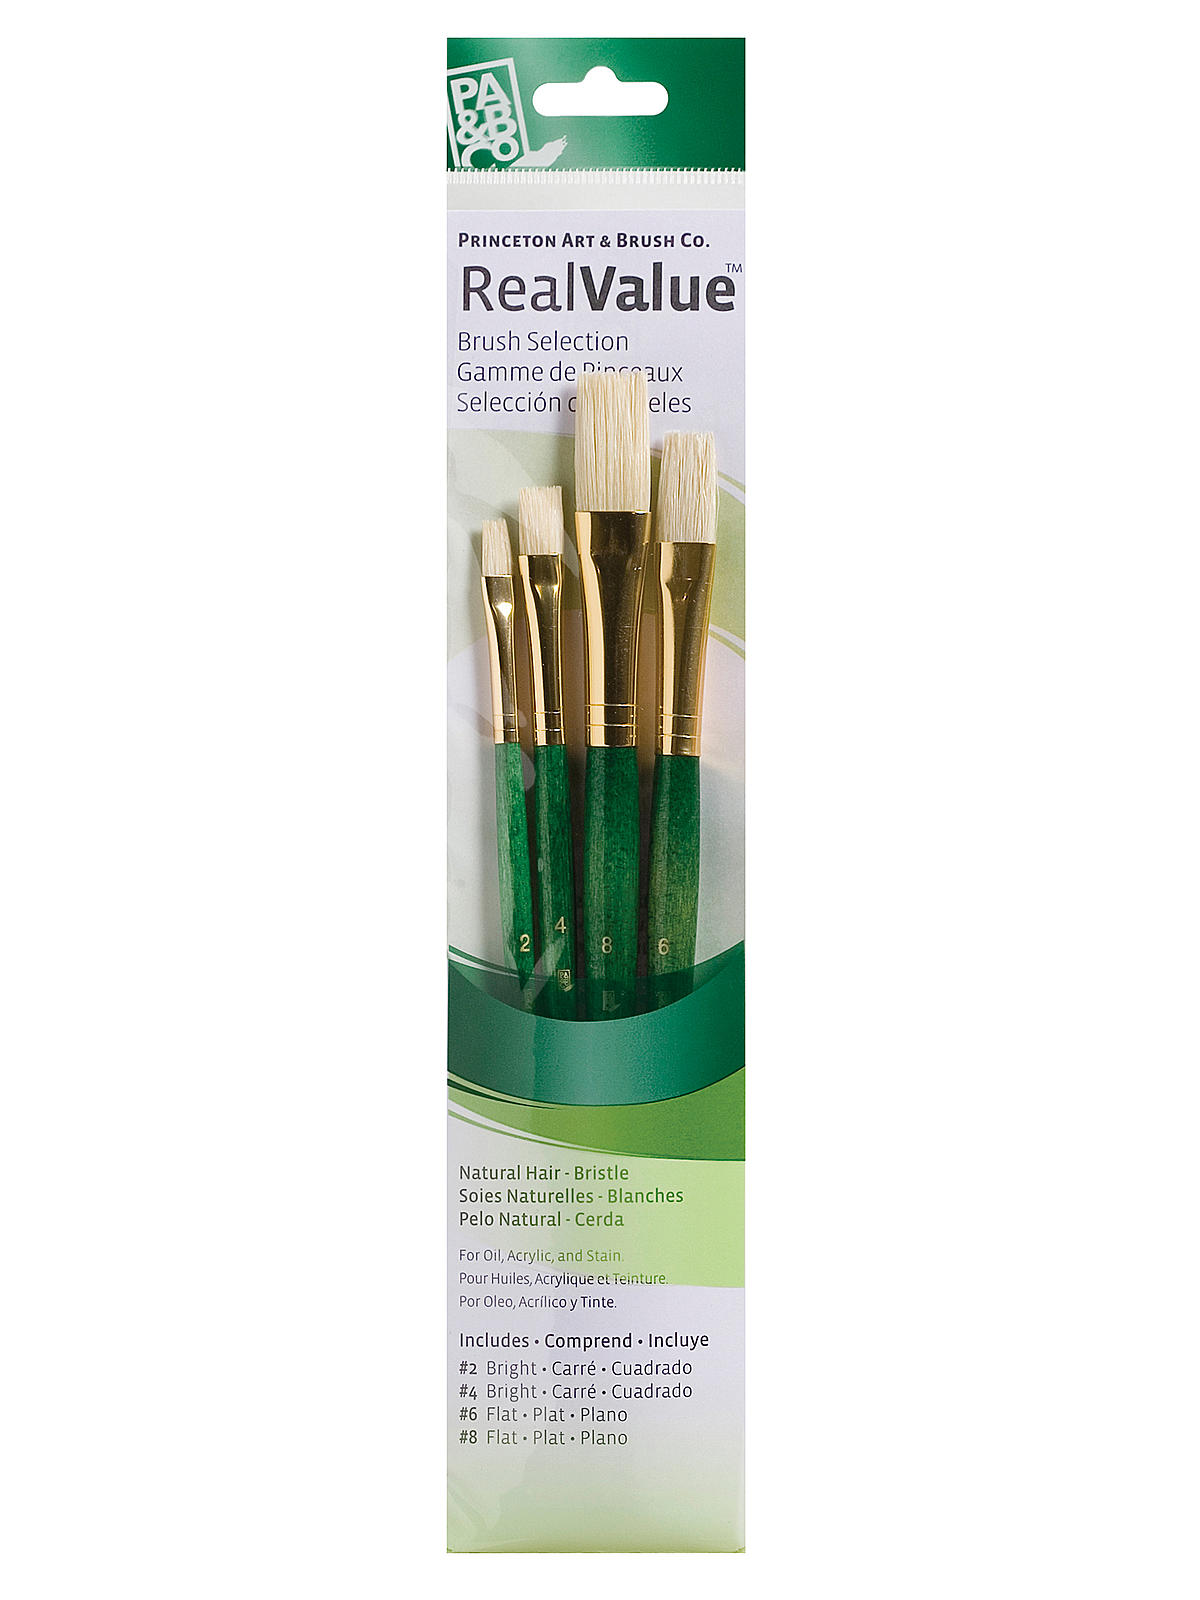 Real Value Series 9000 Green Handled Brush Sets 9112 Set Of 4